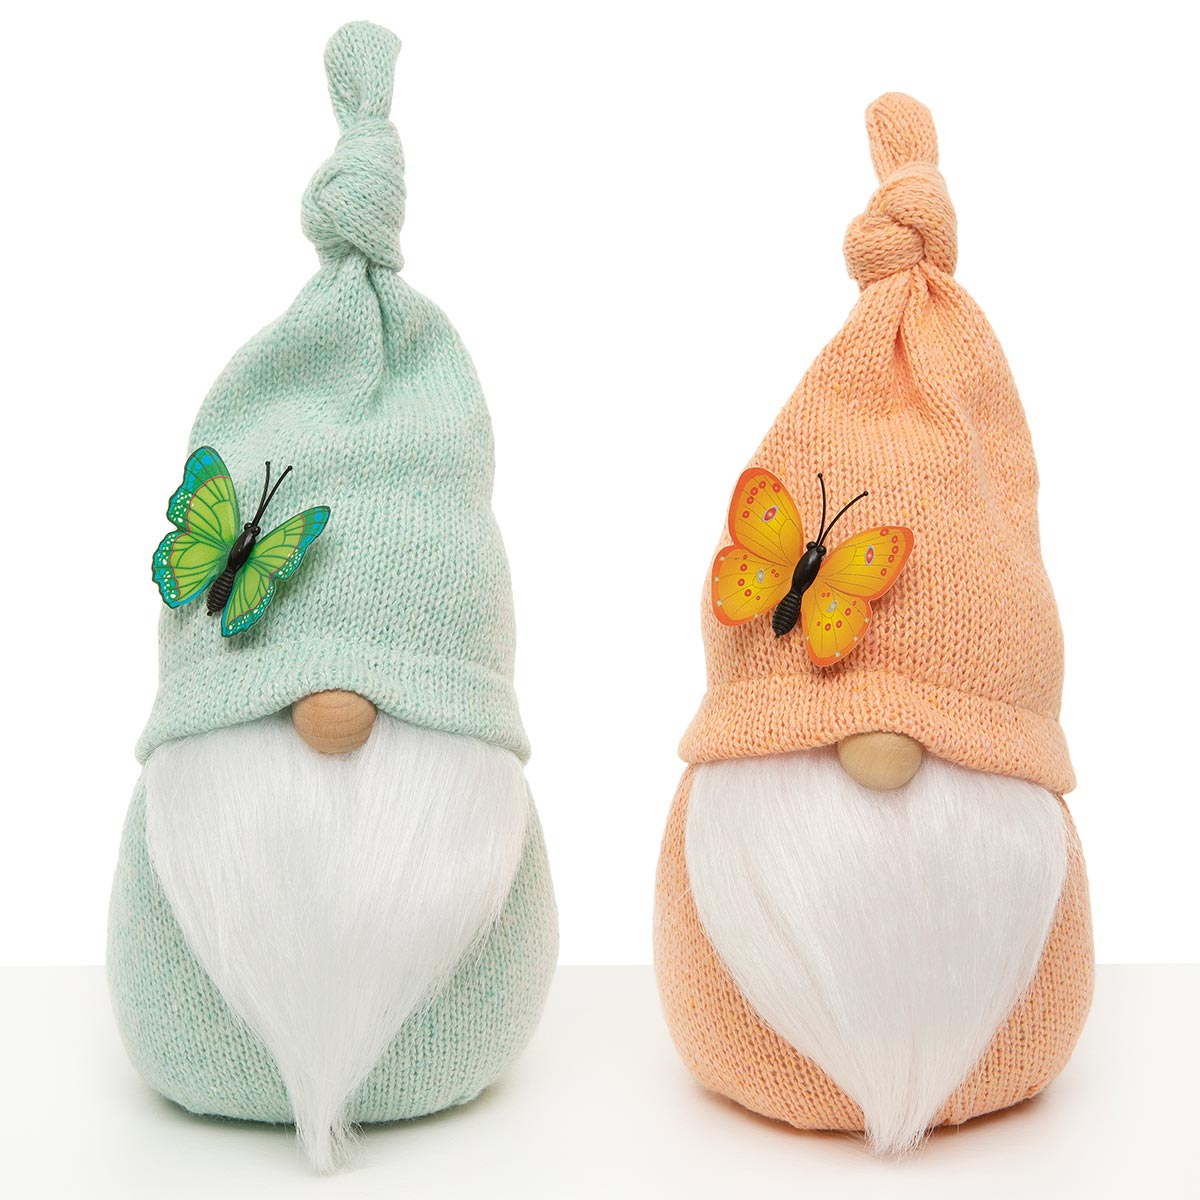 BUTTERFLY GNOME PEACH/GREEN 2 ASSORTED LARGE 4"X10"